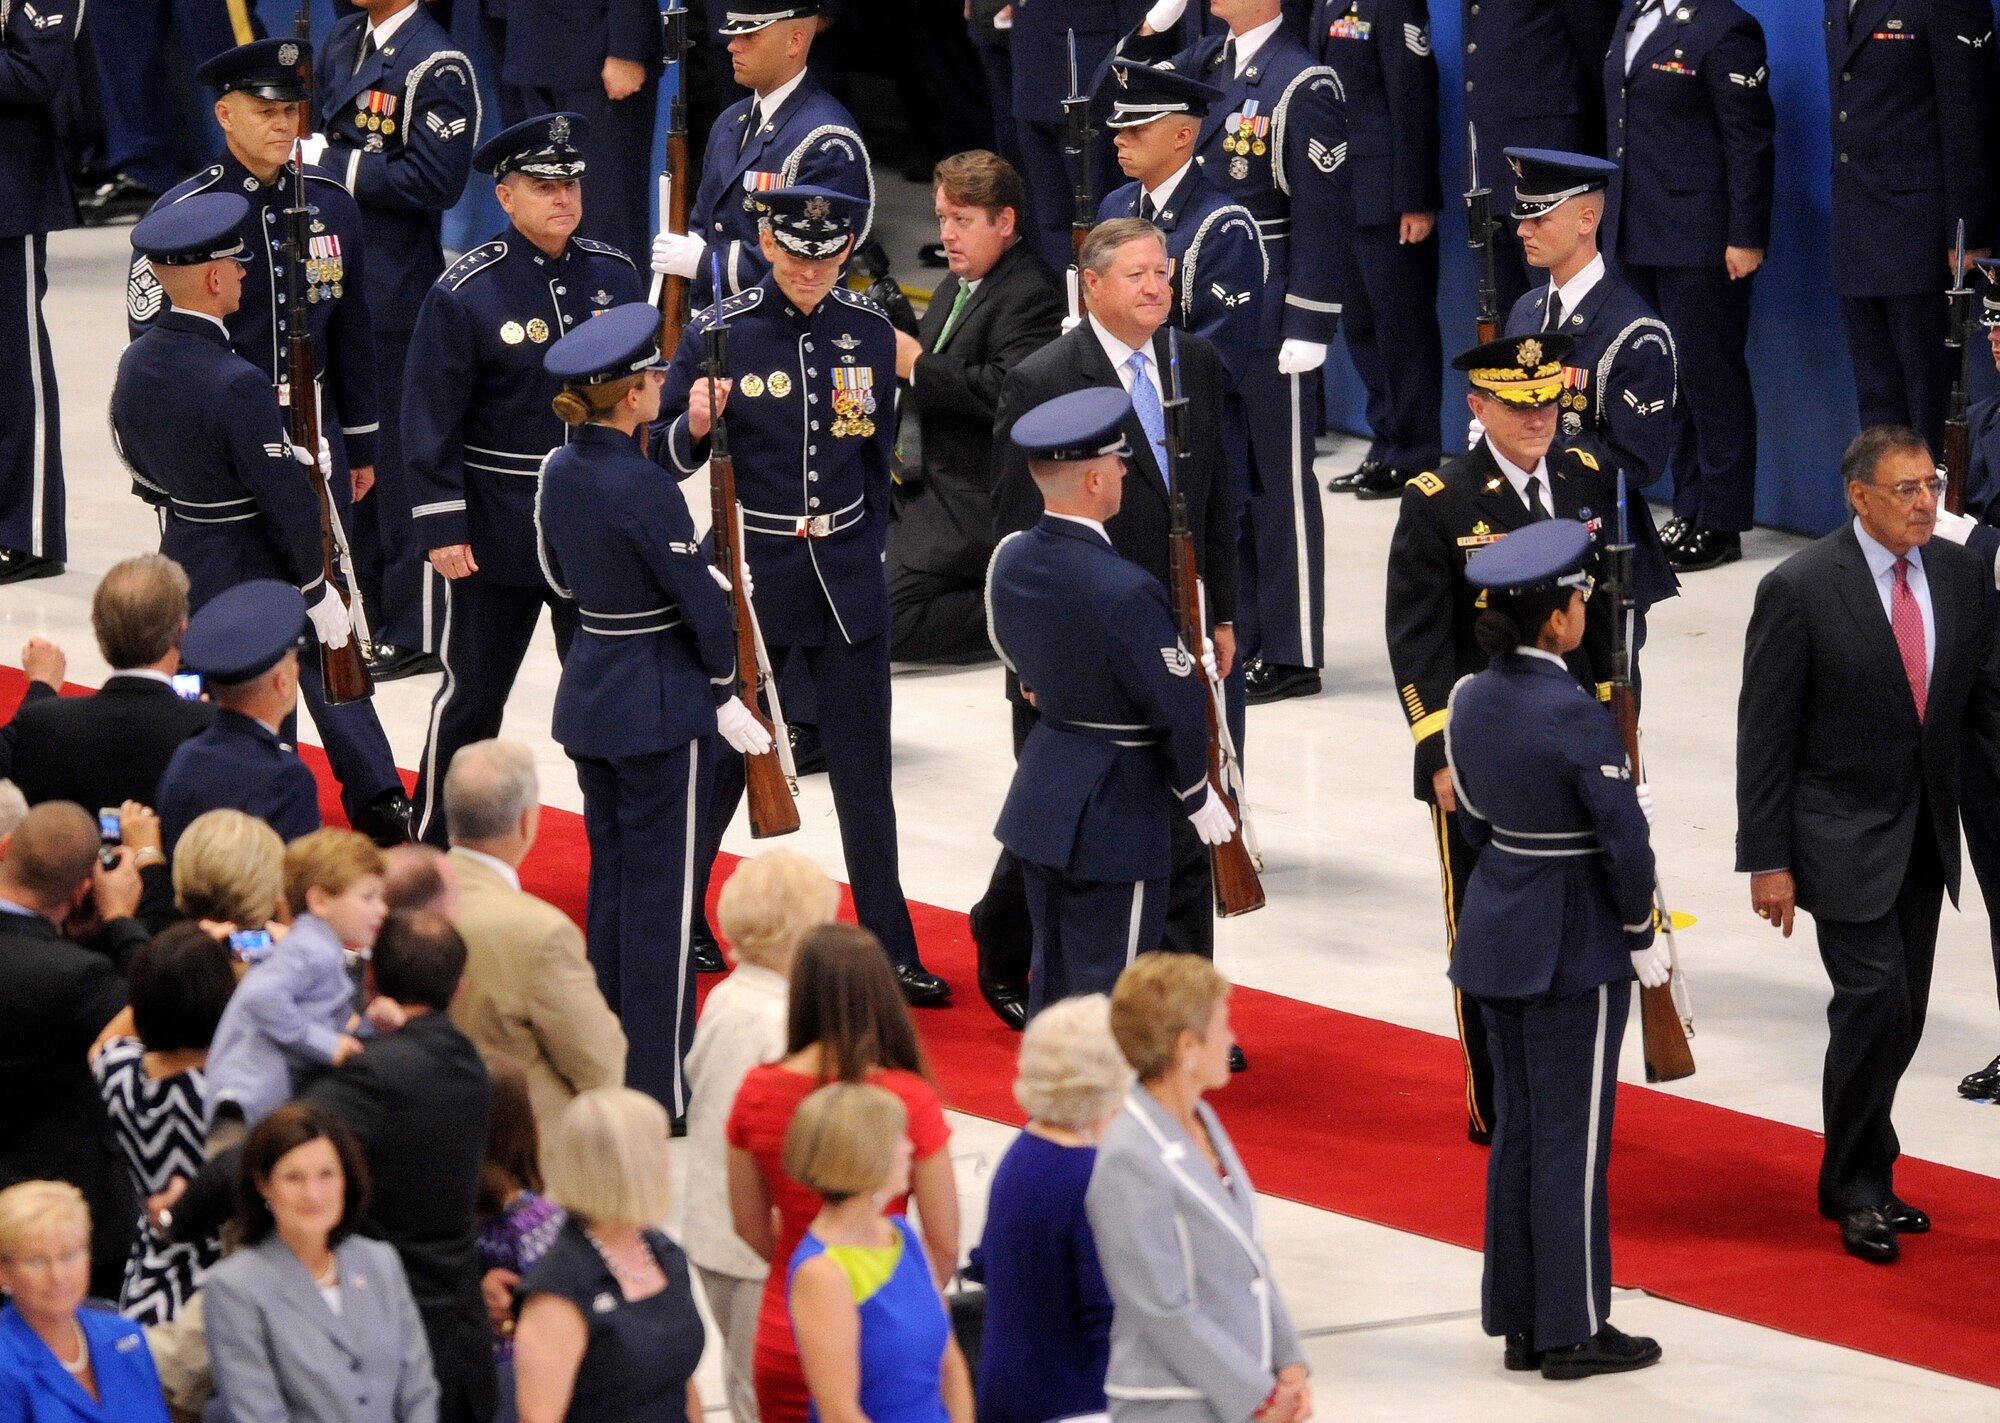 (Right to left) Secretary of Defense Leon Panetta,  Chairman of Joint Chiefs of Staff Gen. Martin Dempsey, former Air Force Chief of Staff Gen. Norton Schwartz, current Air Force Chief of Staff Gen. Mark A. Welsh III and Chief Master Sergeant of the Air Force James Roy  arrive during the Air Force Chief of Staff Retirement and Appointment ceremonies at Joint Base Andrews, Md., Aug. 10, 2012. Schwartz served in the Air Force for 39 years, the last four years as the Air Force’s senior uniformed leader. Prior to becoming the Air Force chief of staff, Welsh commanded U.S. Air Forces in Europe. (U.S. Air Force photo/Master Sgt. Cecilio Ricardo)